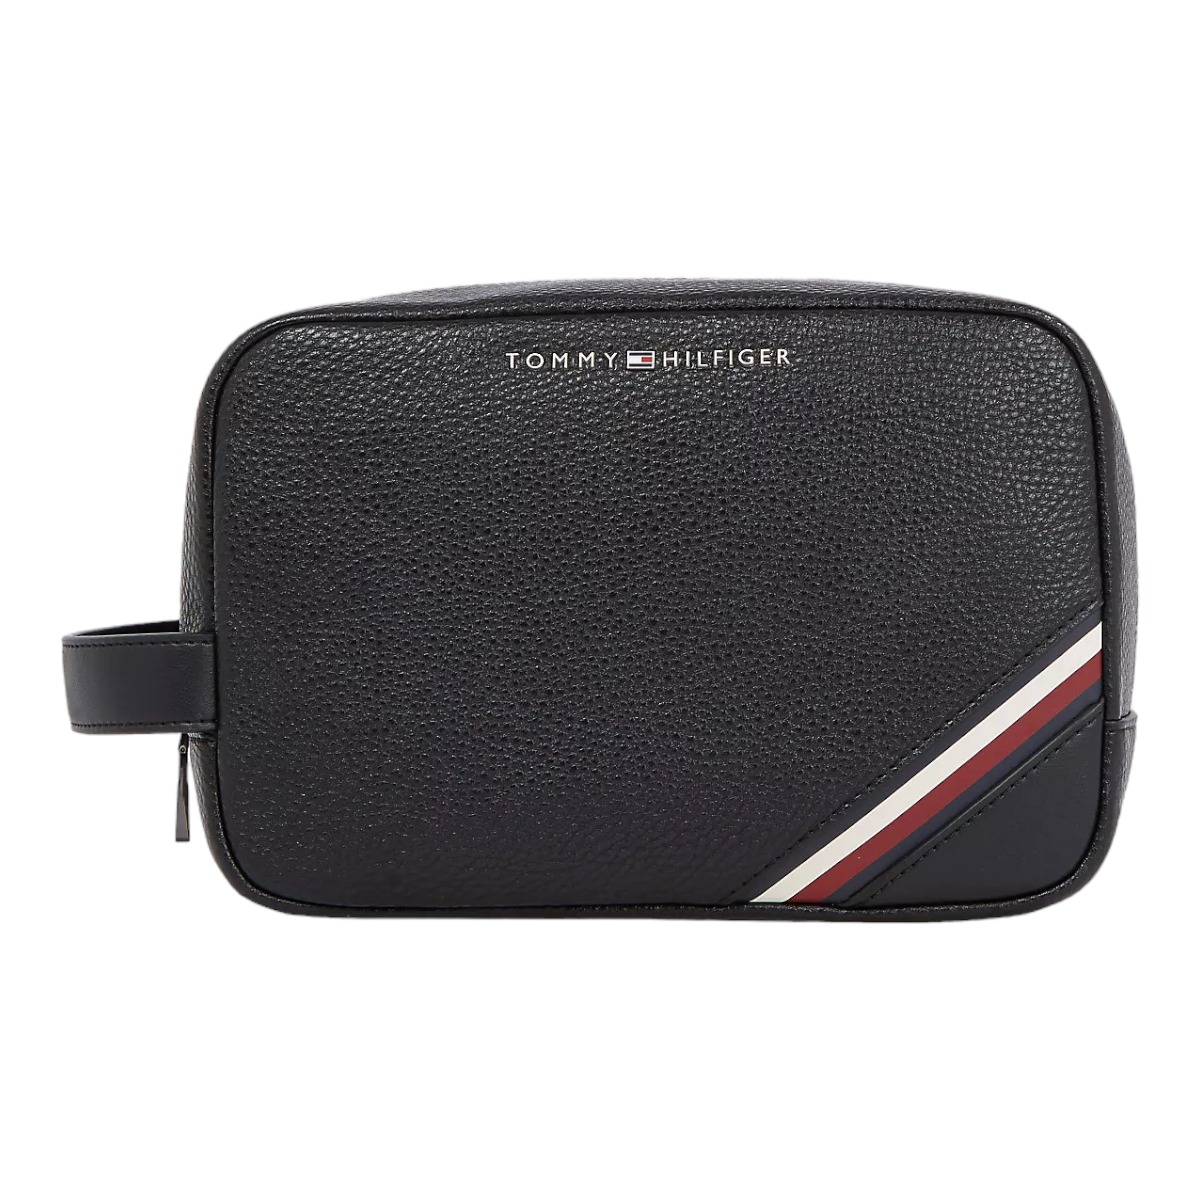 Tommy Hilfiger Man's Cosmetic Bag 8720645289098